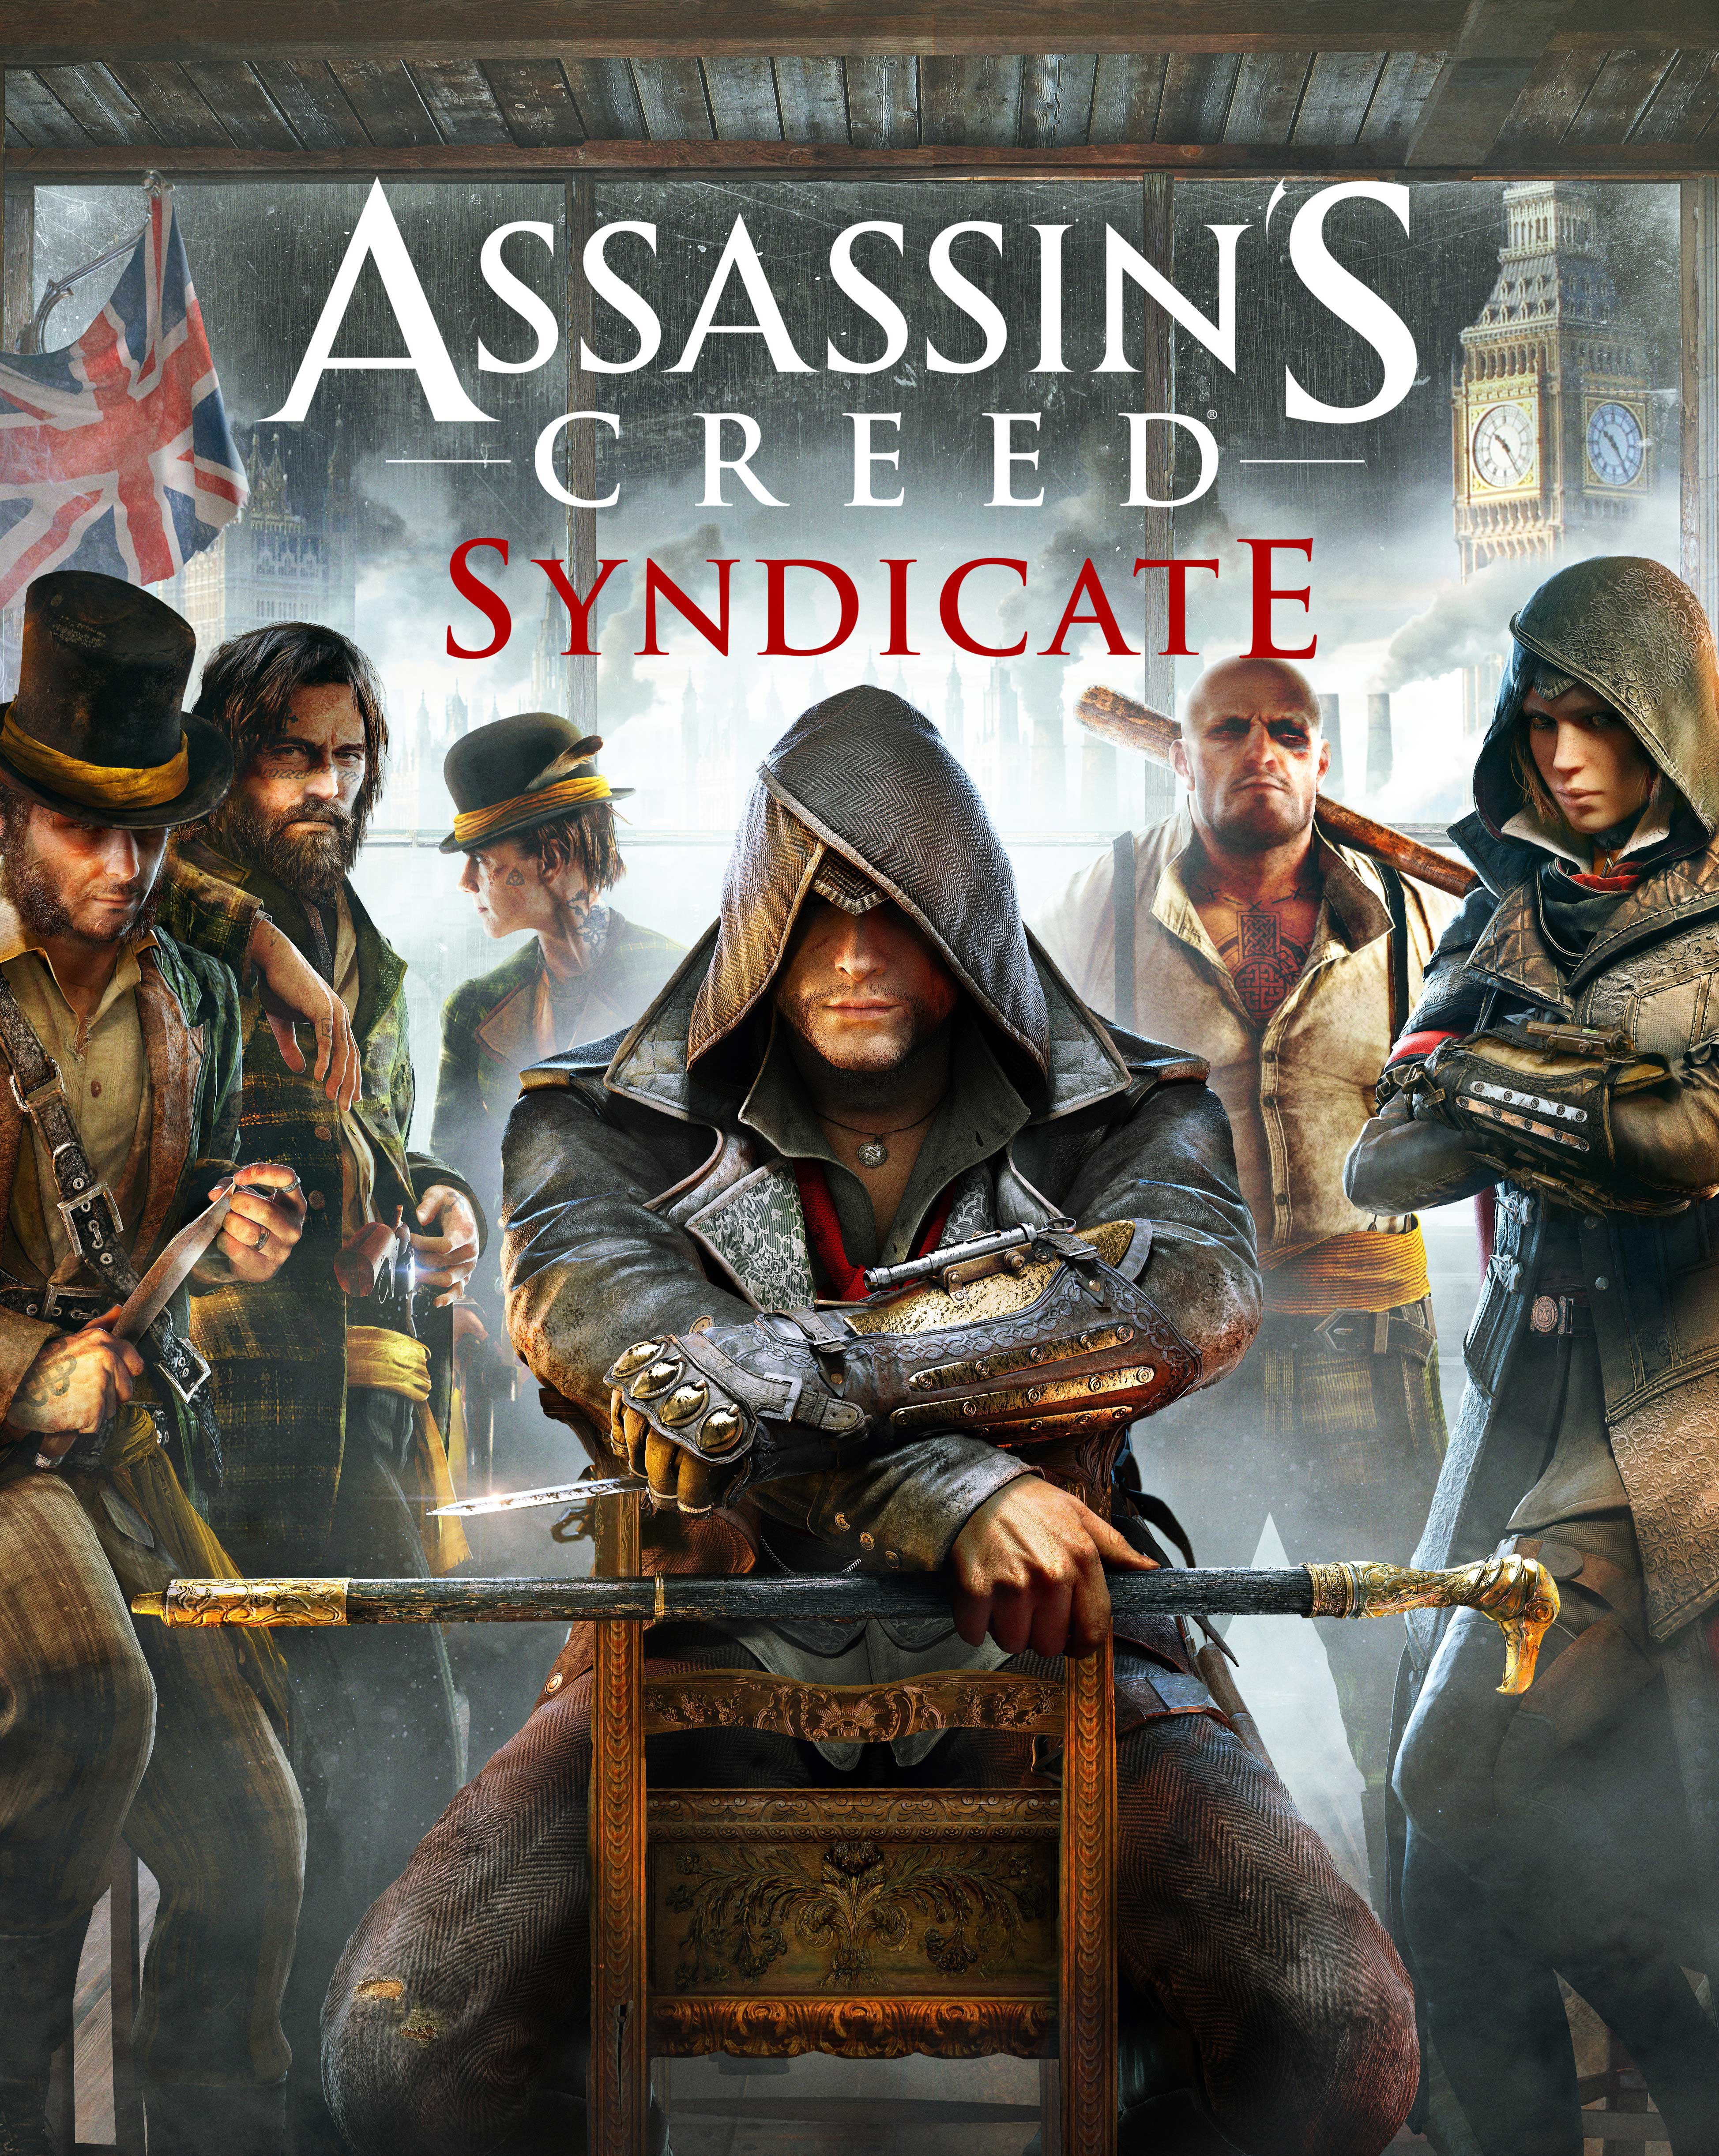 Assassin's Creed: Syndicate | ASSASSIN'S CREED Wiki | Fandom